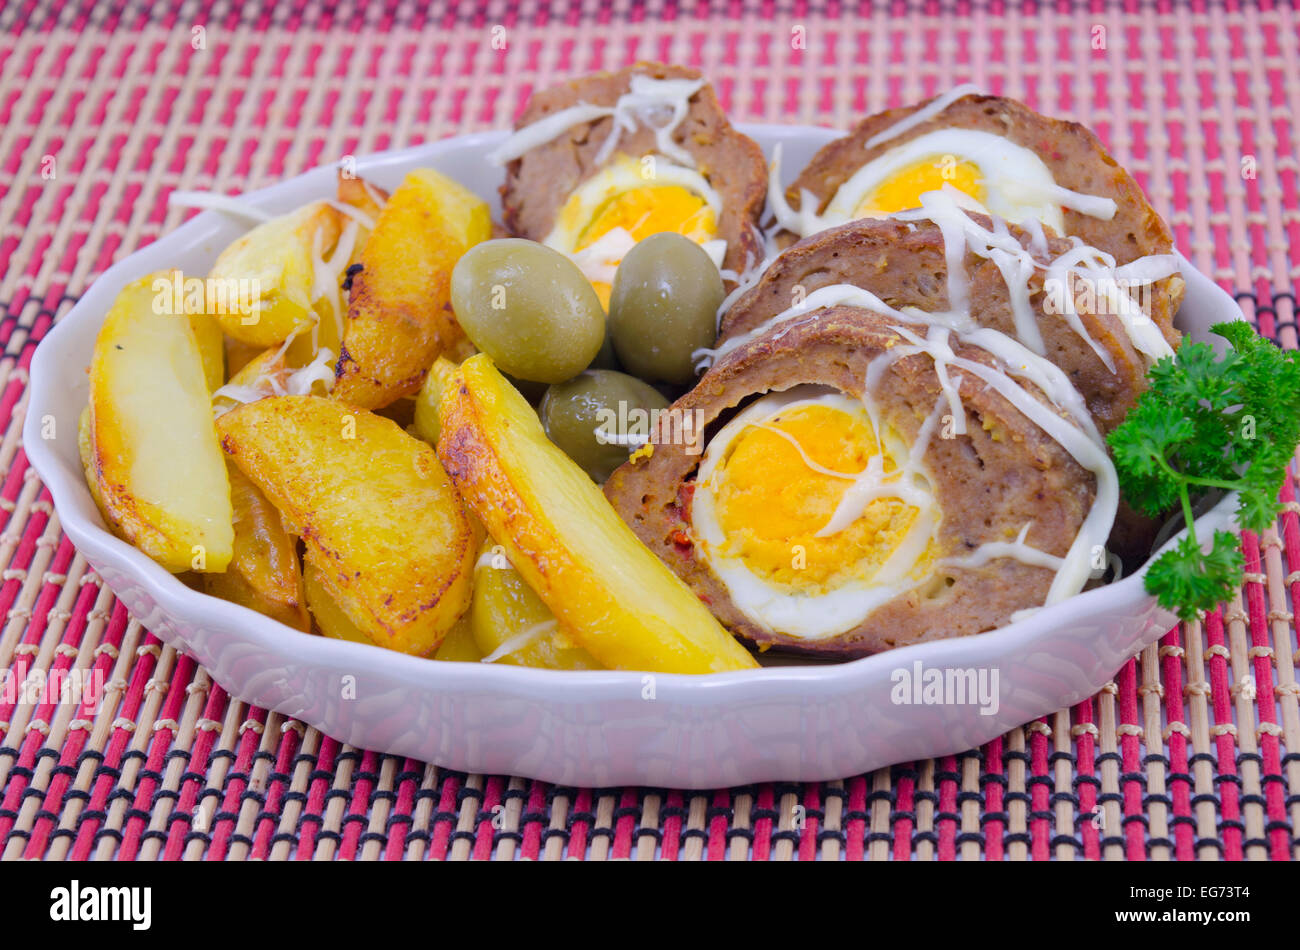 Delicious meatloaf, potato and olives on a restaurant dining table Stock Photo